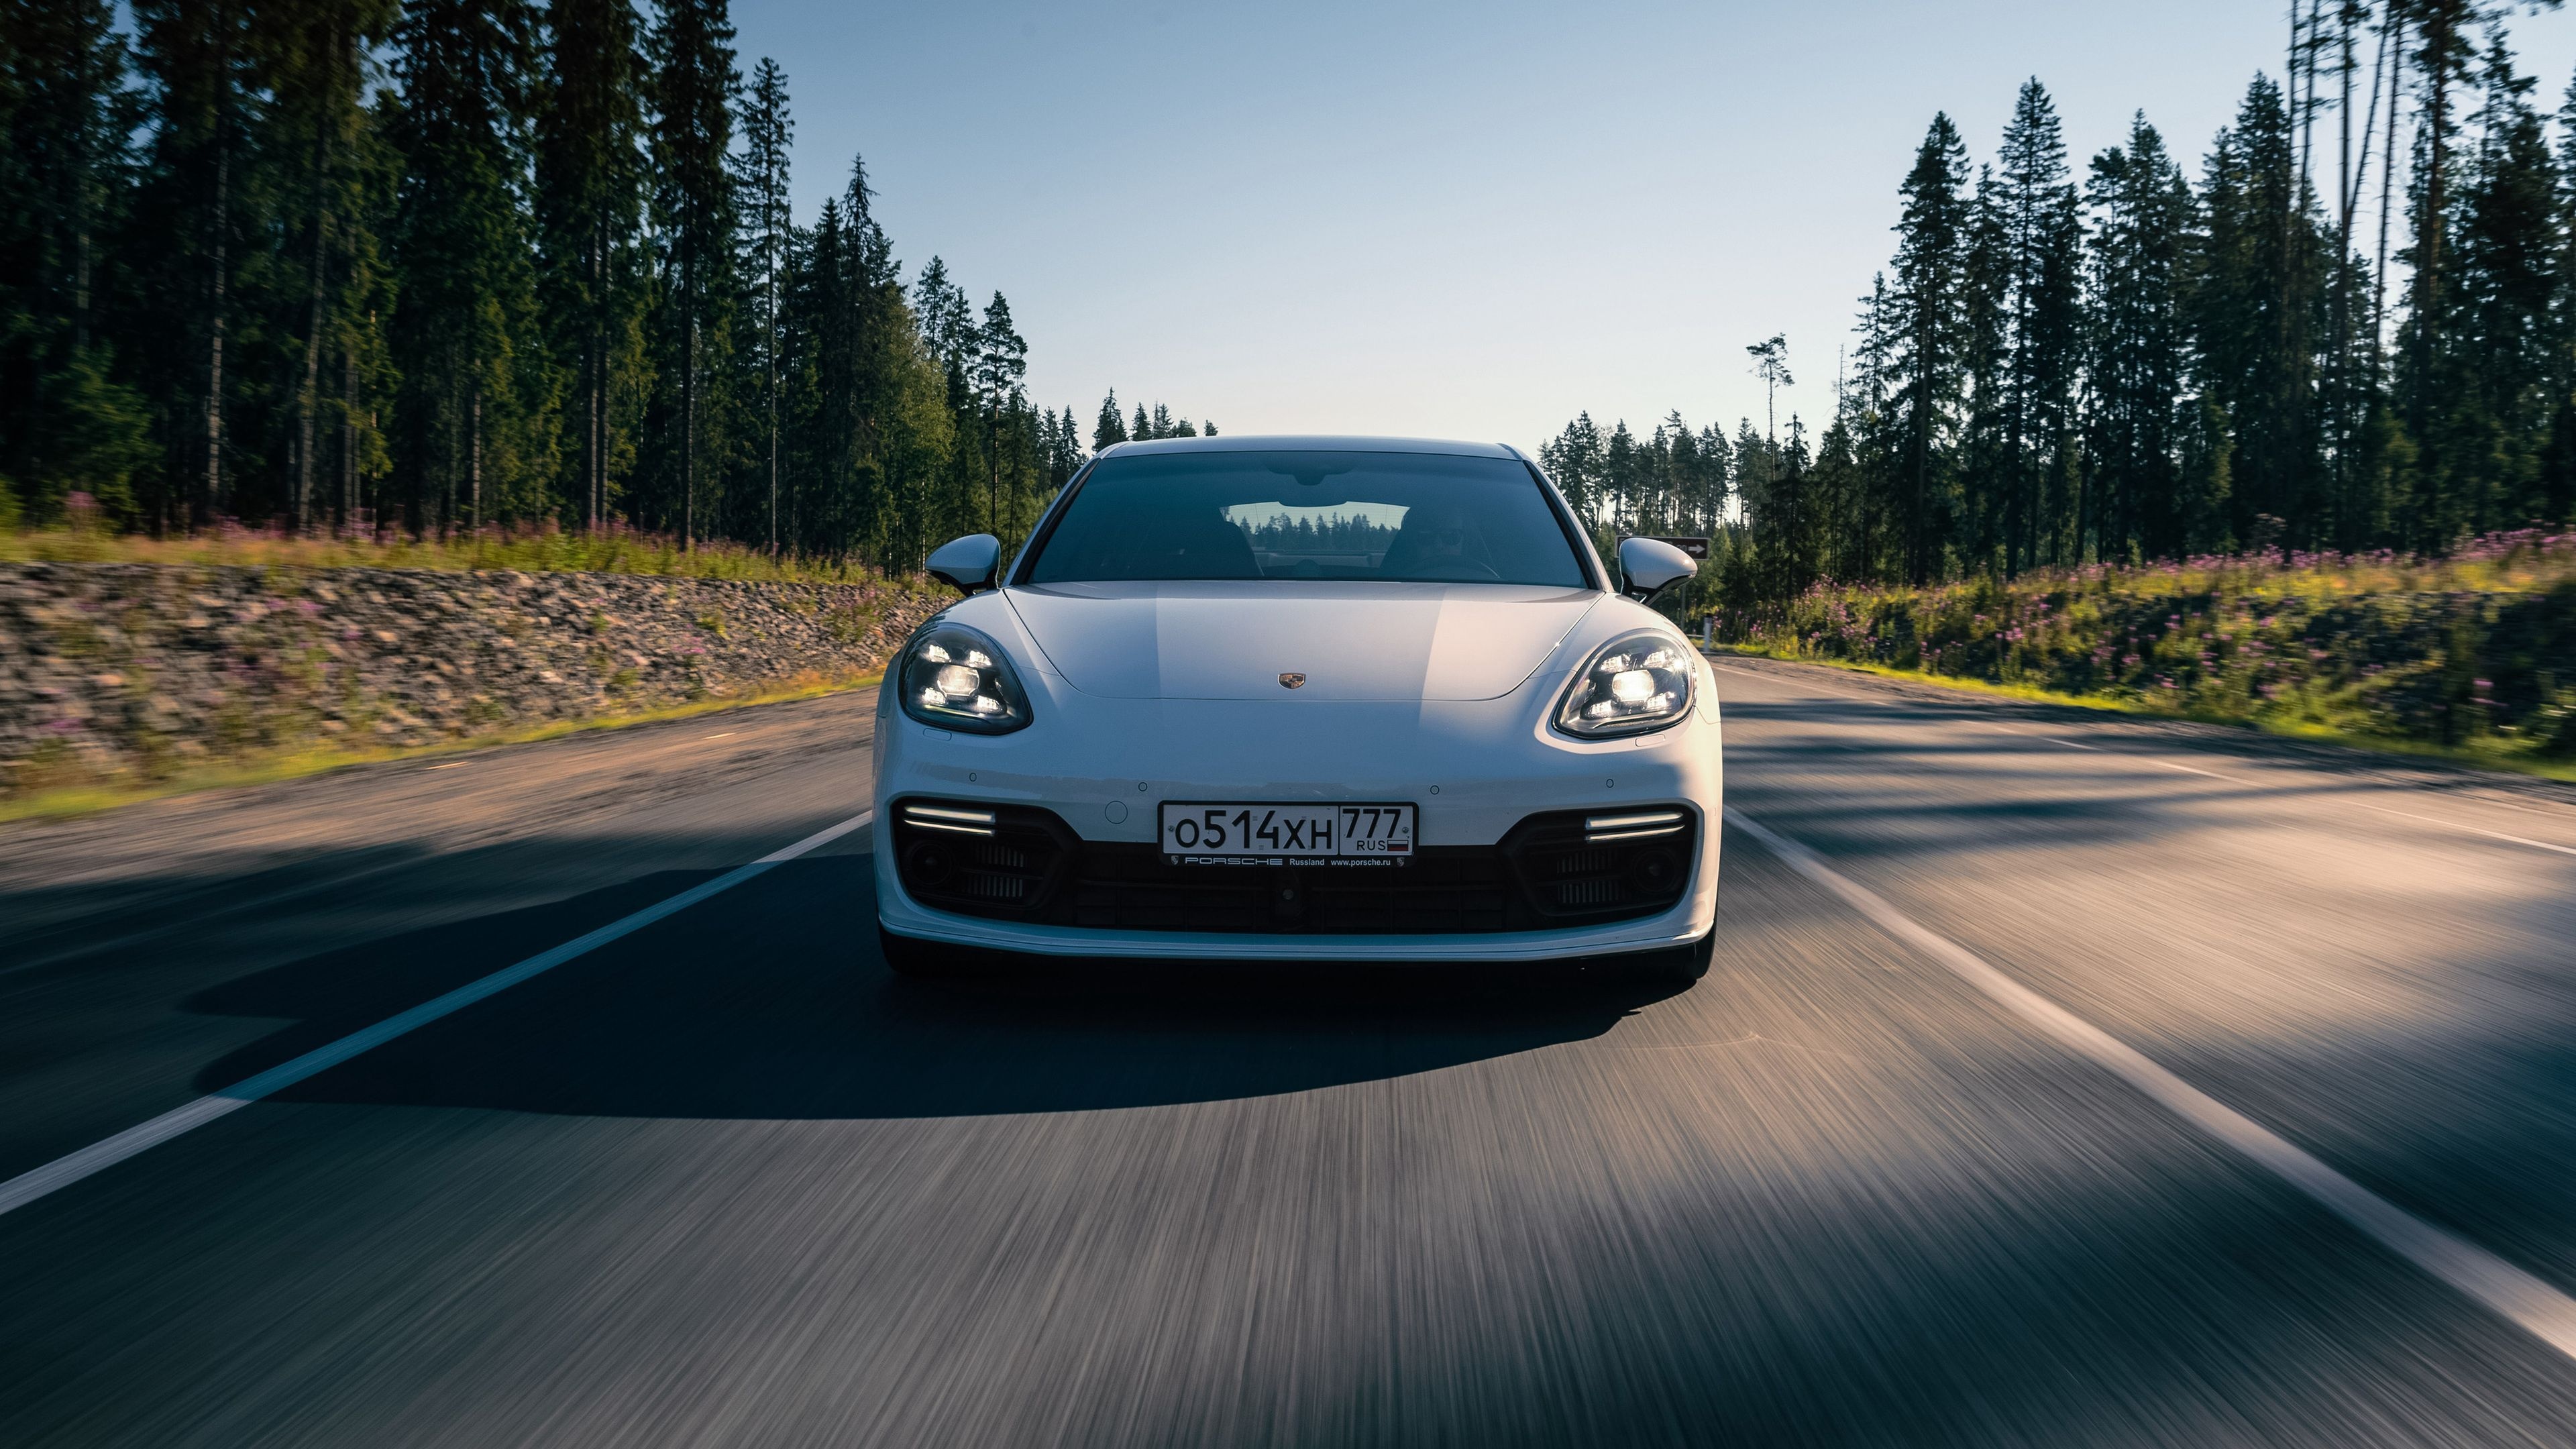 Porsche Panamera, Sleek and stylish, Thrilling driving experience, Unmatched performance, 3840x2160 4K Desktop